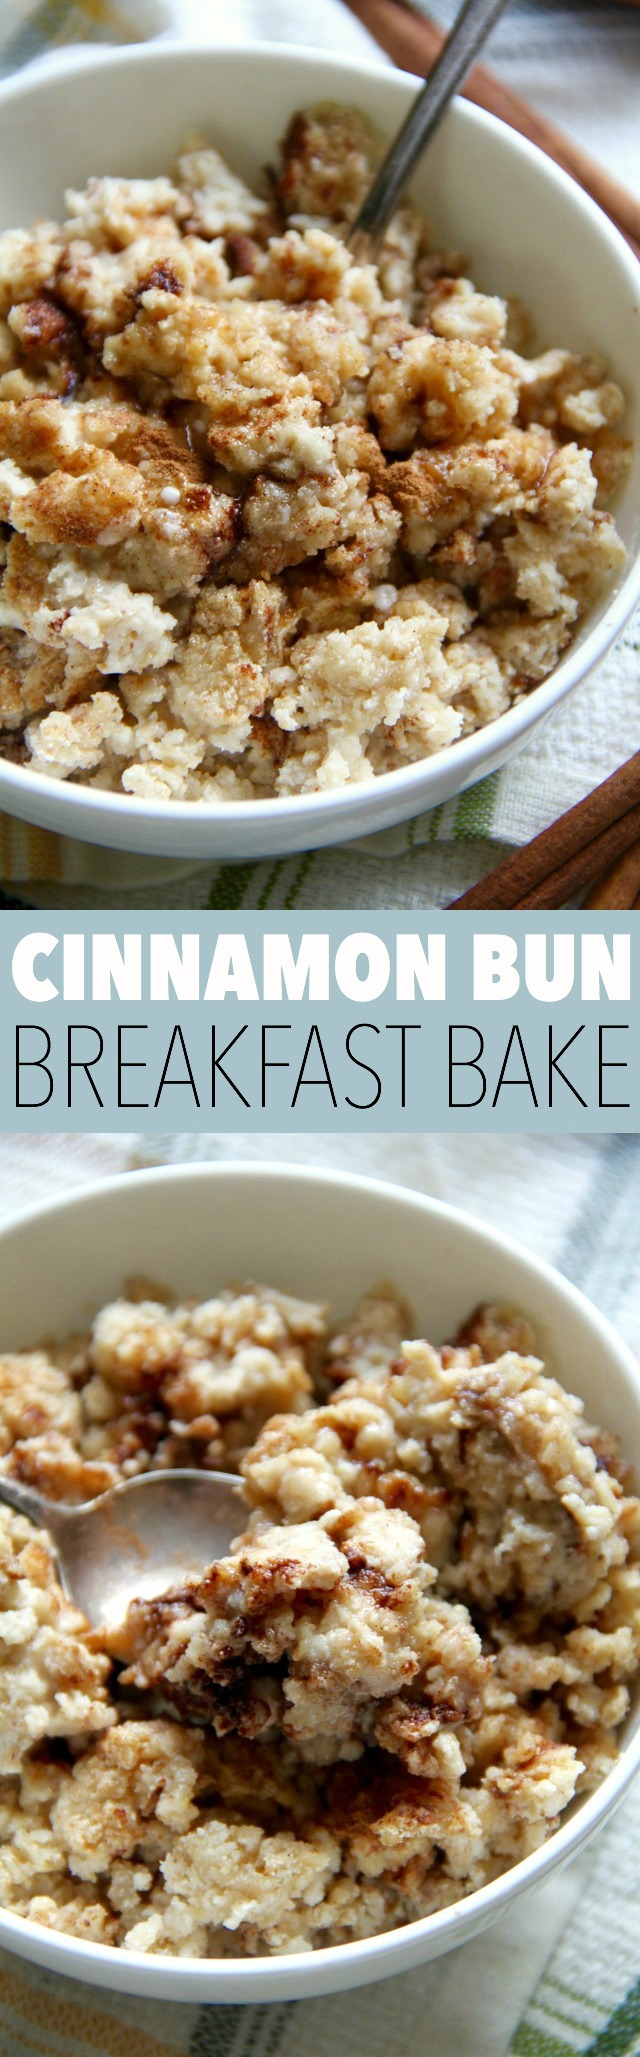 Cinnamon Bun Breakfast Bake -- enjoy the taste and texture of a traditional cinnamon bun without all the added sugar and saturated fat! The gluten-free and vegan breakfast bake is a healthy and delicious way to start the day. || runningwithspoons.com #vegan #glutenfree #breakfast